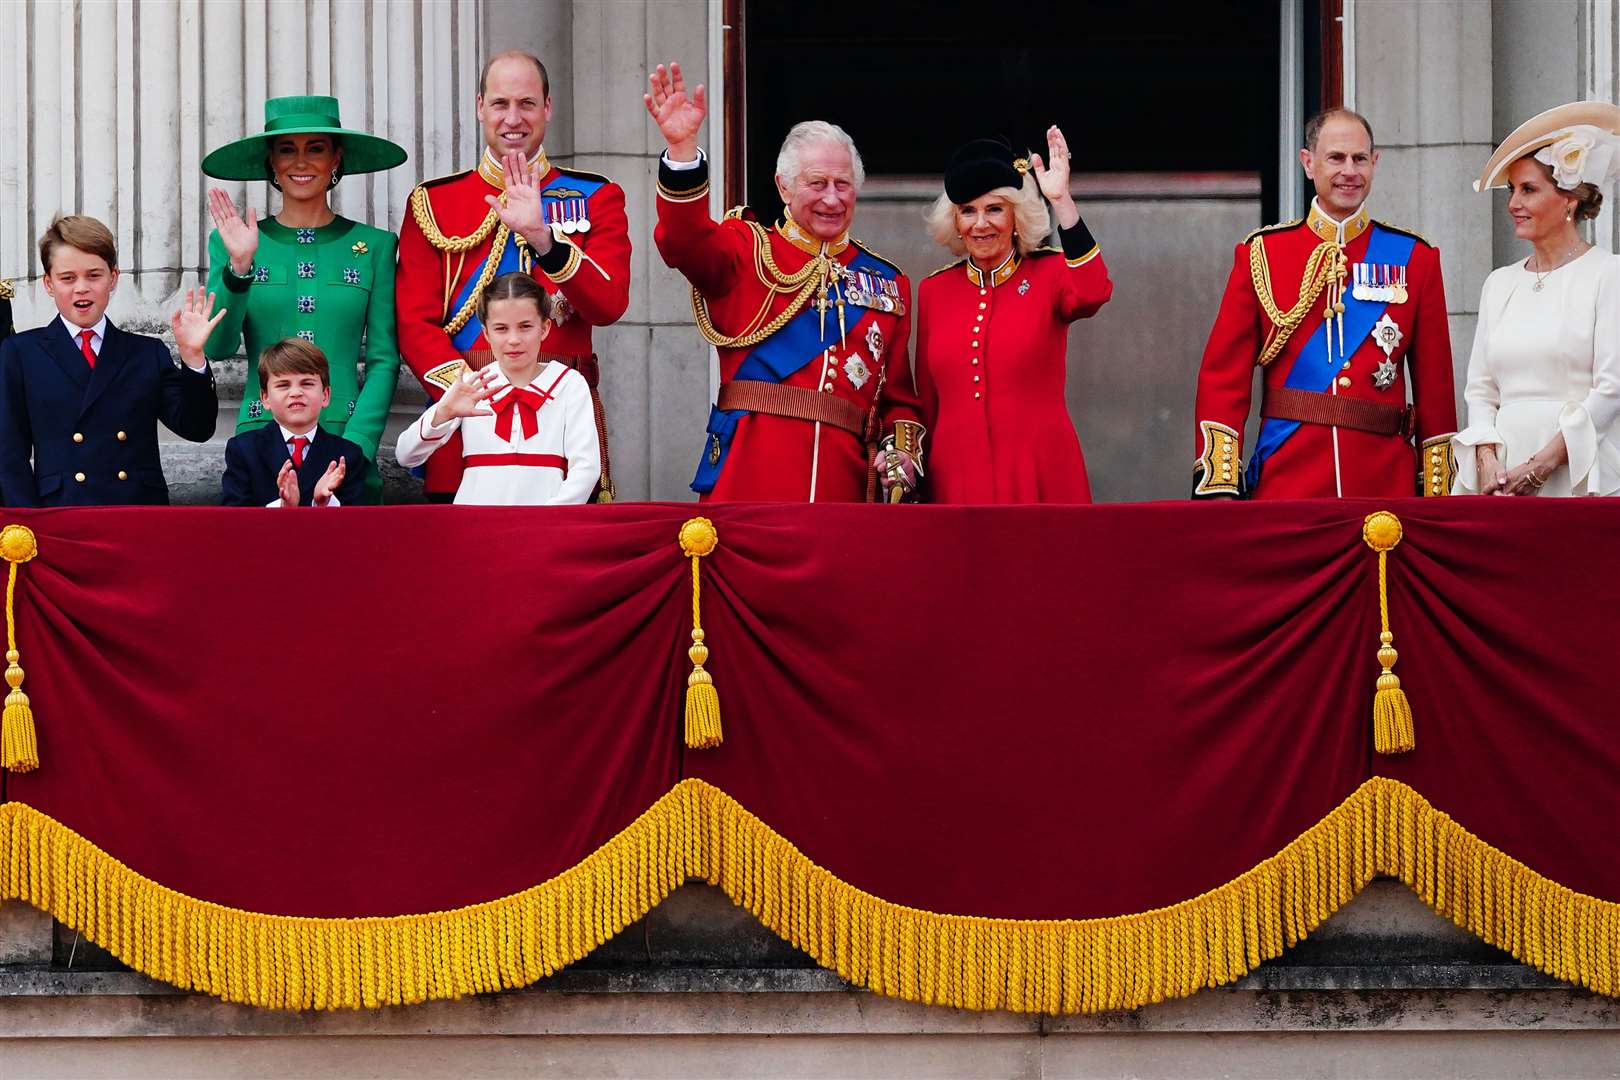 Members of the royal family on the balcony of Buckingham Palace, London, to view the flypast following the Trooping the Colour